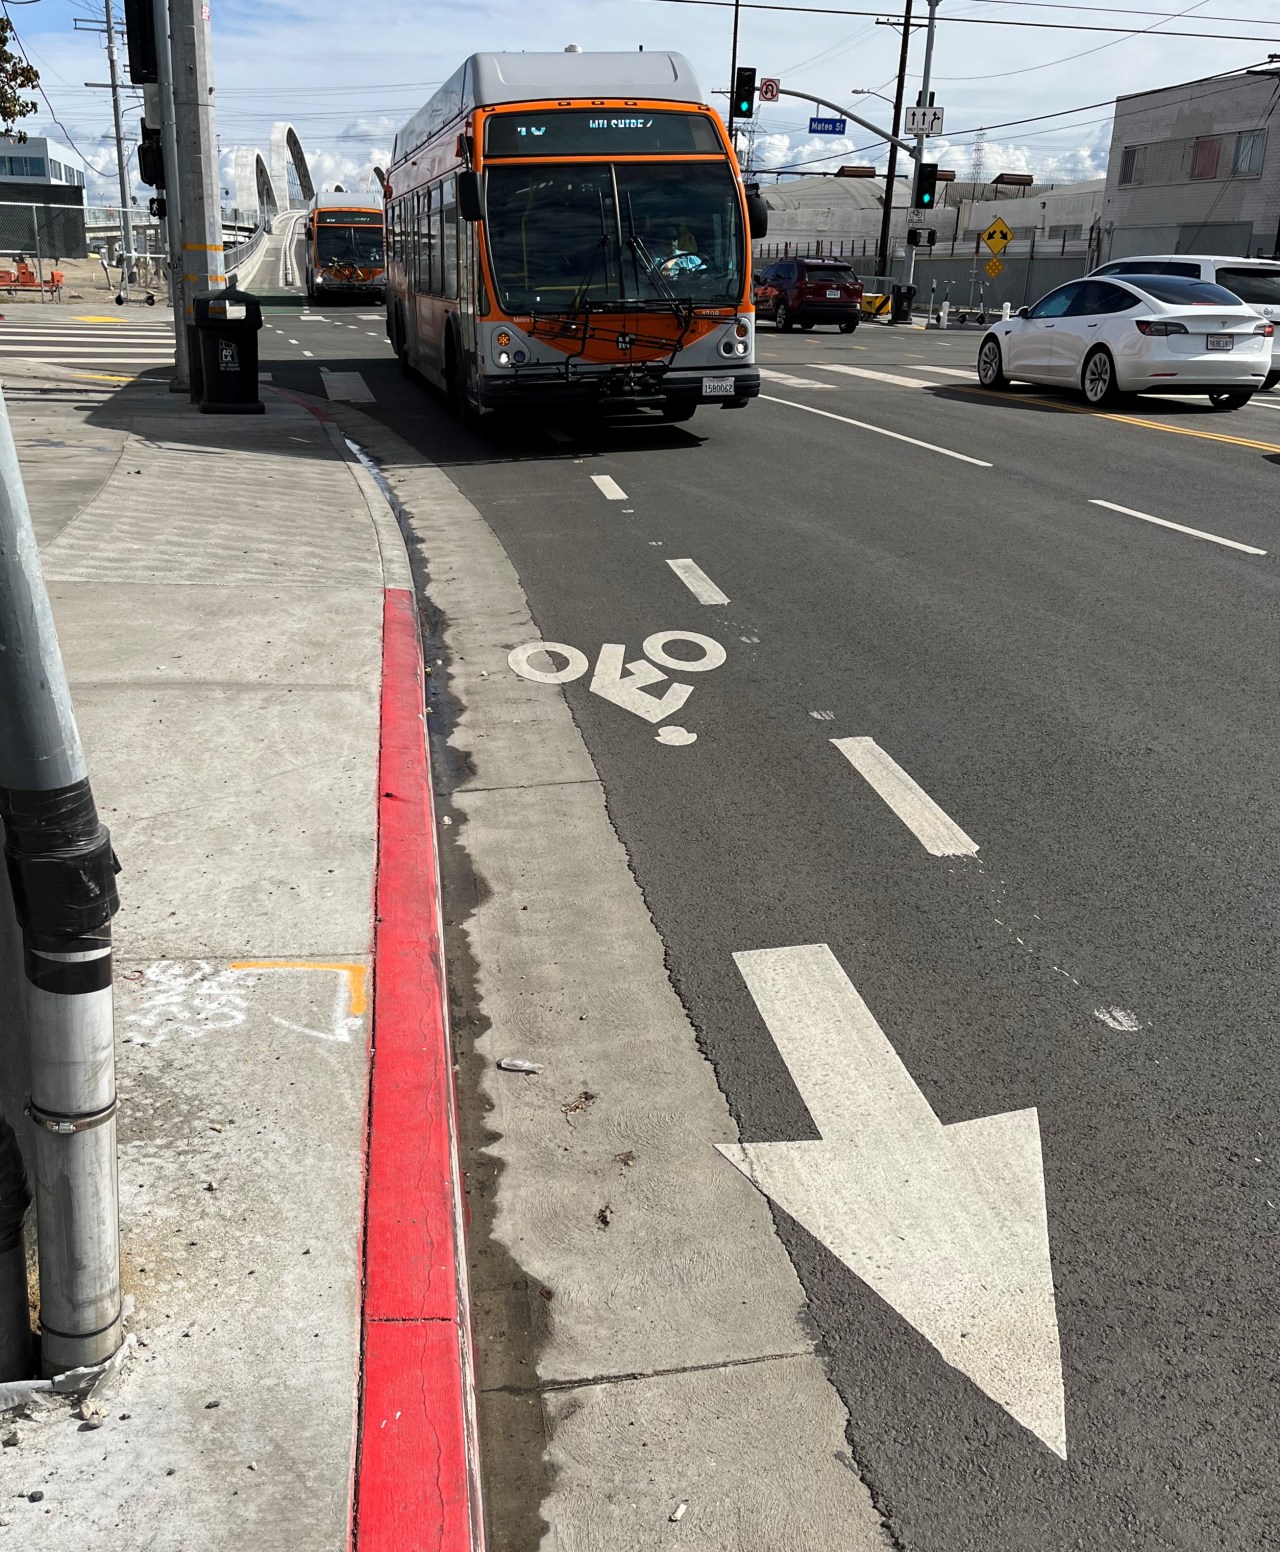 New bike lane on 6th Street, with new viaduct in the background